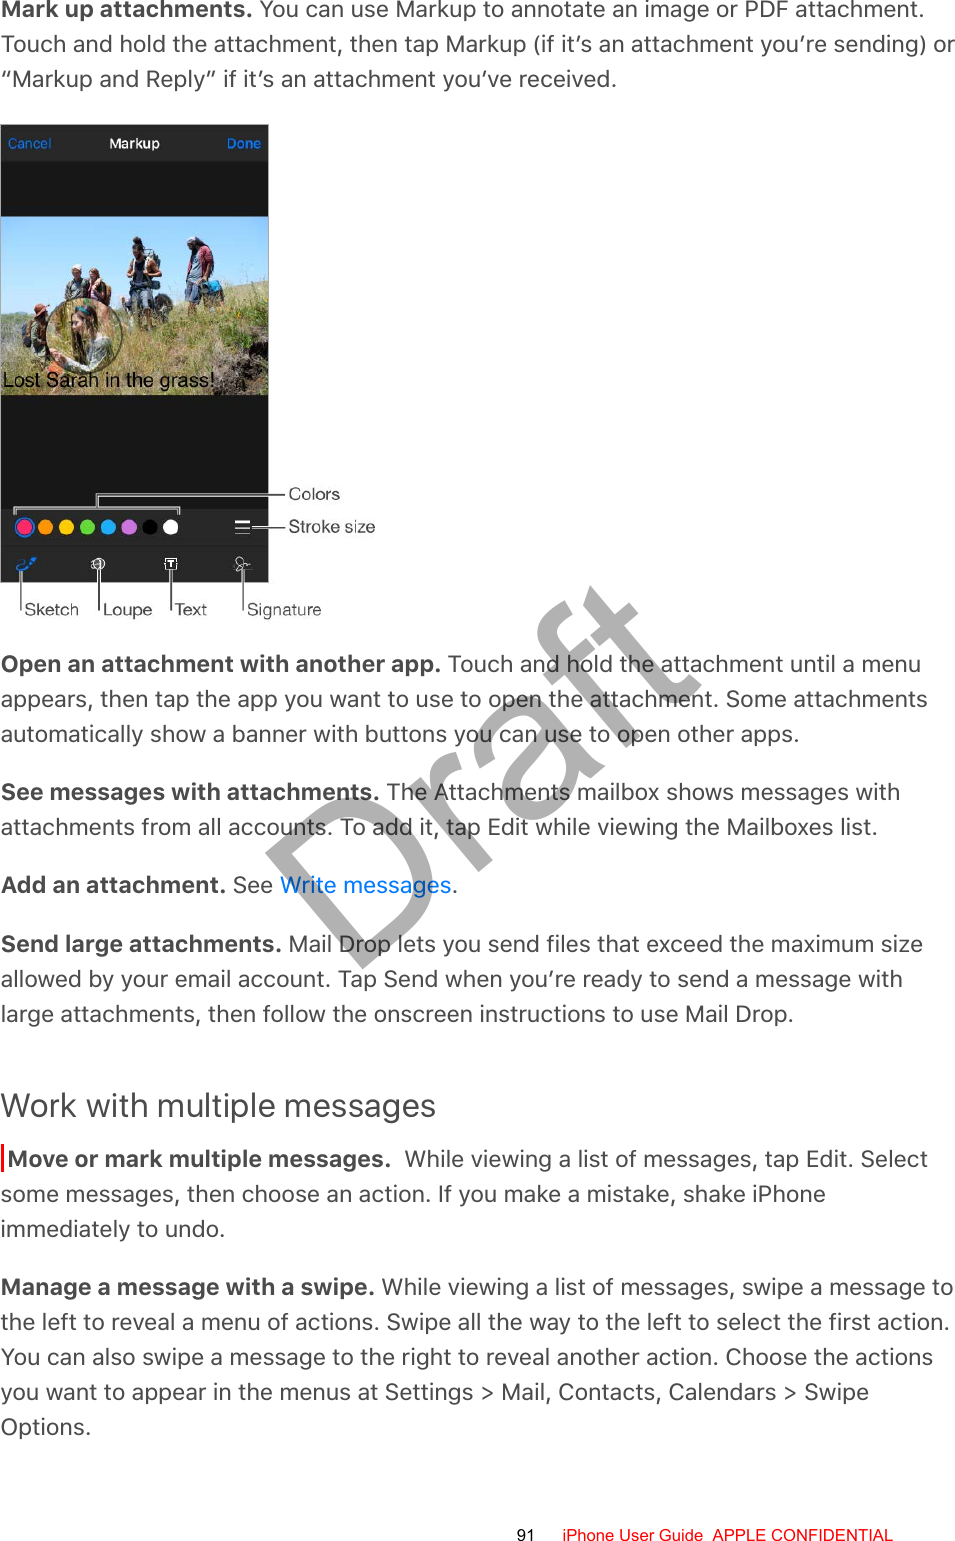 Mark up attachments. You can use Markup to annotate an image or PDF attachment.Touch and hold the attachment, then tap Markup (if it’s an attachment you’re sending) or“Markup and Reply” if it’s an attachment you’ve received.Open an attachment with another app. Touch and hold the attachment until a menuappears, then tap the app you want to use to open the attachment. Some attachmentsautomatically show a banner with buttons you can use to open other apps.See messages with attachments. The Attachments mailbox shows messages withattachments from all accounts. To add it, tap Edit while viewing the Mailboxes list.Add an attachment. See  .Send large attachments. Mail Drop lets you send files that exceed the maximum sizeallowed by your email account. Tap Send when you’re ready to send a message withlarge attachments, then follow the onscreen instructions to use Mail Drop.Work with multiple messagesMove or mark multiple messages.  While viewing a list of messages, tap Edit. Selectsome messages, then choose an action. If you make a mistake, shake iPhoneimmediately to undo.Manage a message with a swipe. While viewing a list of messages, swipe a message tothe left to reveal a menu of actions. Swipe all the way to the left to select the first action.You can also swipe a message to the right to reveal another action. Choose the actionsyou want to appear in the menus at Settings &gt; Mail, Contacts, Calendars &gt; SwipeOptions.Write messages91 iPhone User Guide  APPLE CONFIDENTIALDraft